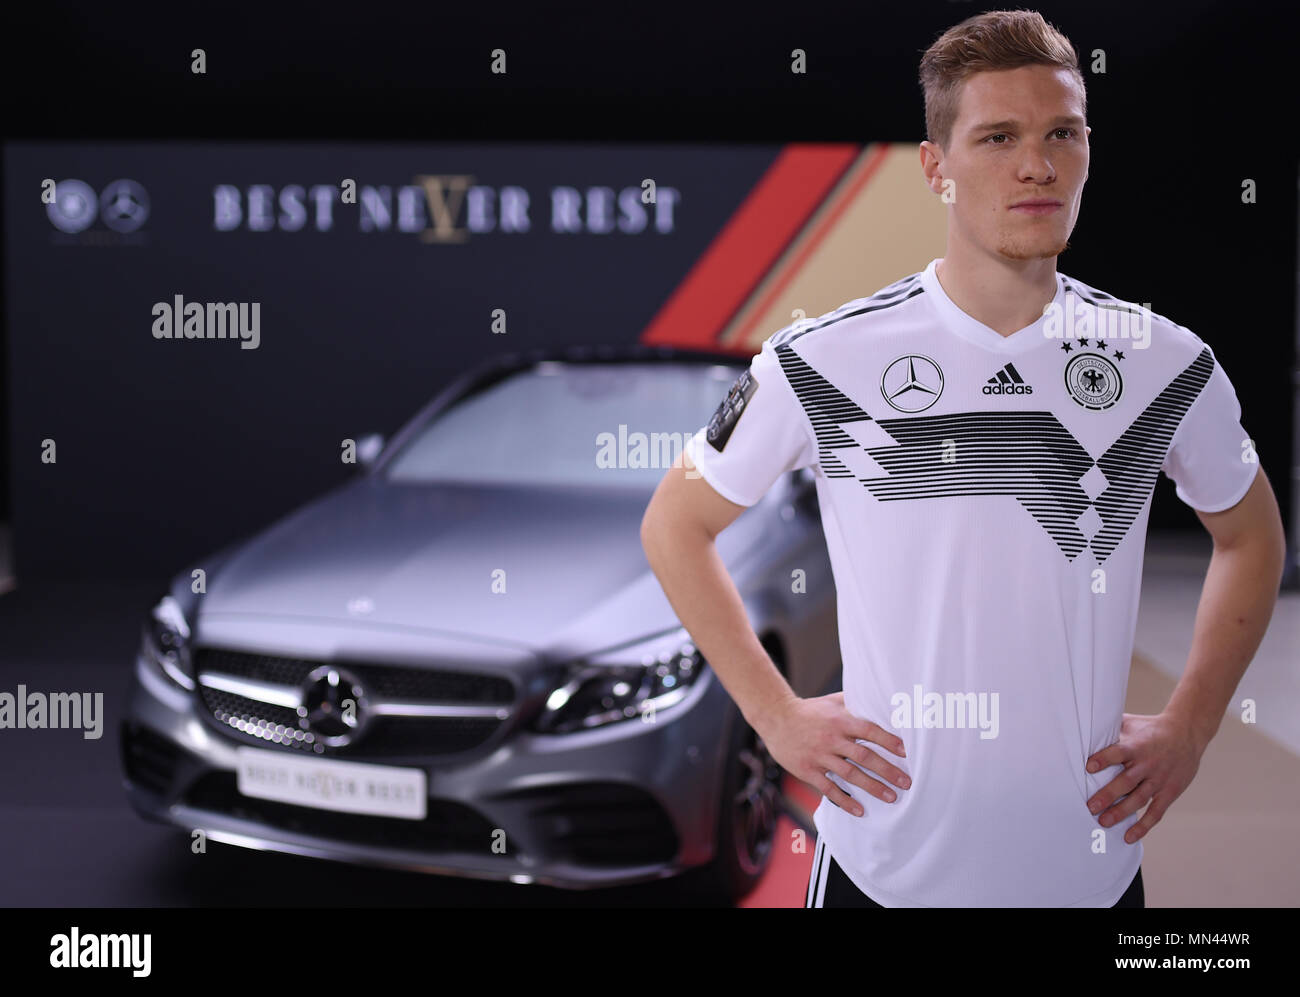 Marcel Halstenberg (Germany) on the Mercedes-Benz C 400 4Matic. Rear: The  World Cup logo of the Mercedes-Benz Generalsupplier (# BEST NEVER REST)  Preview/Archive Image: Topic of the Caderbekanntgabe on 15.05.2018-  GES/Football/DFB Marketing